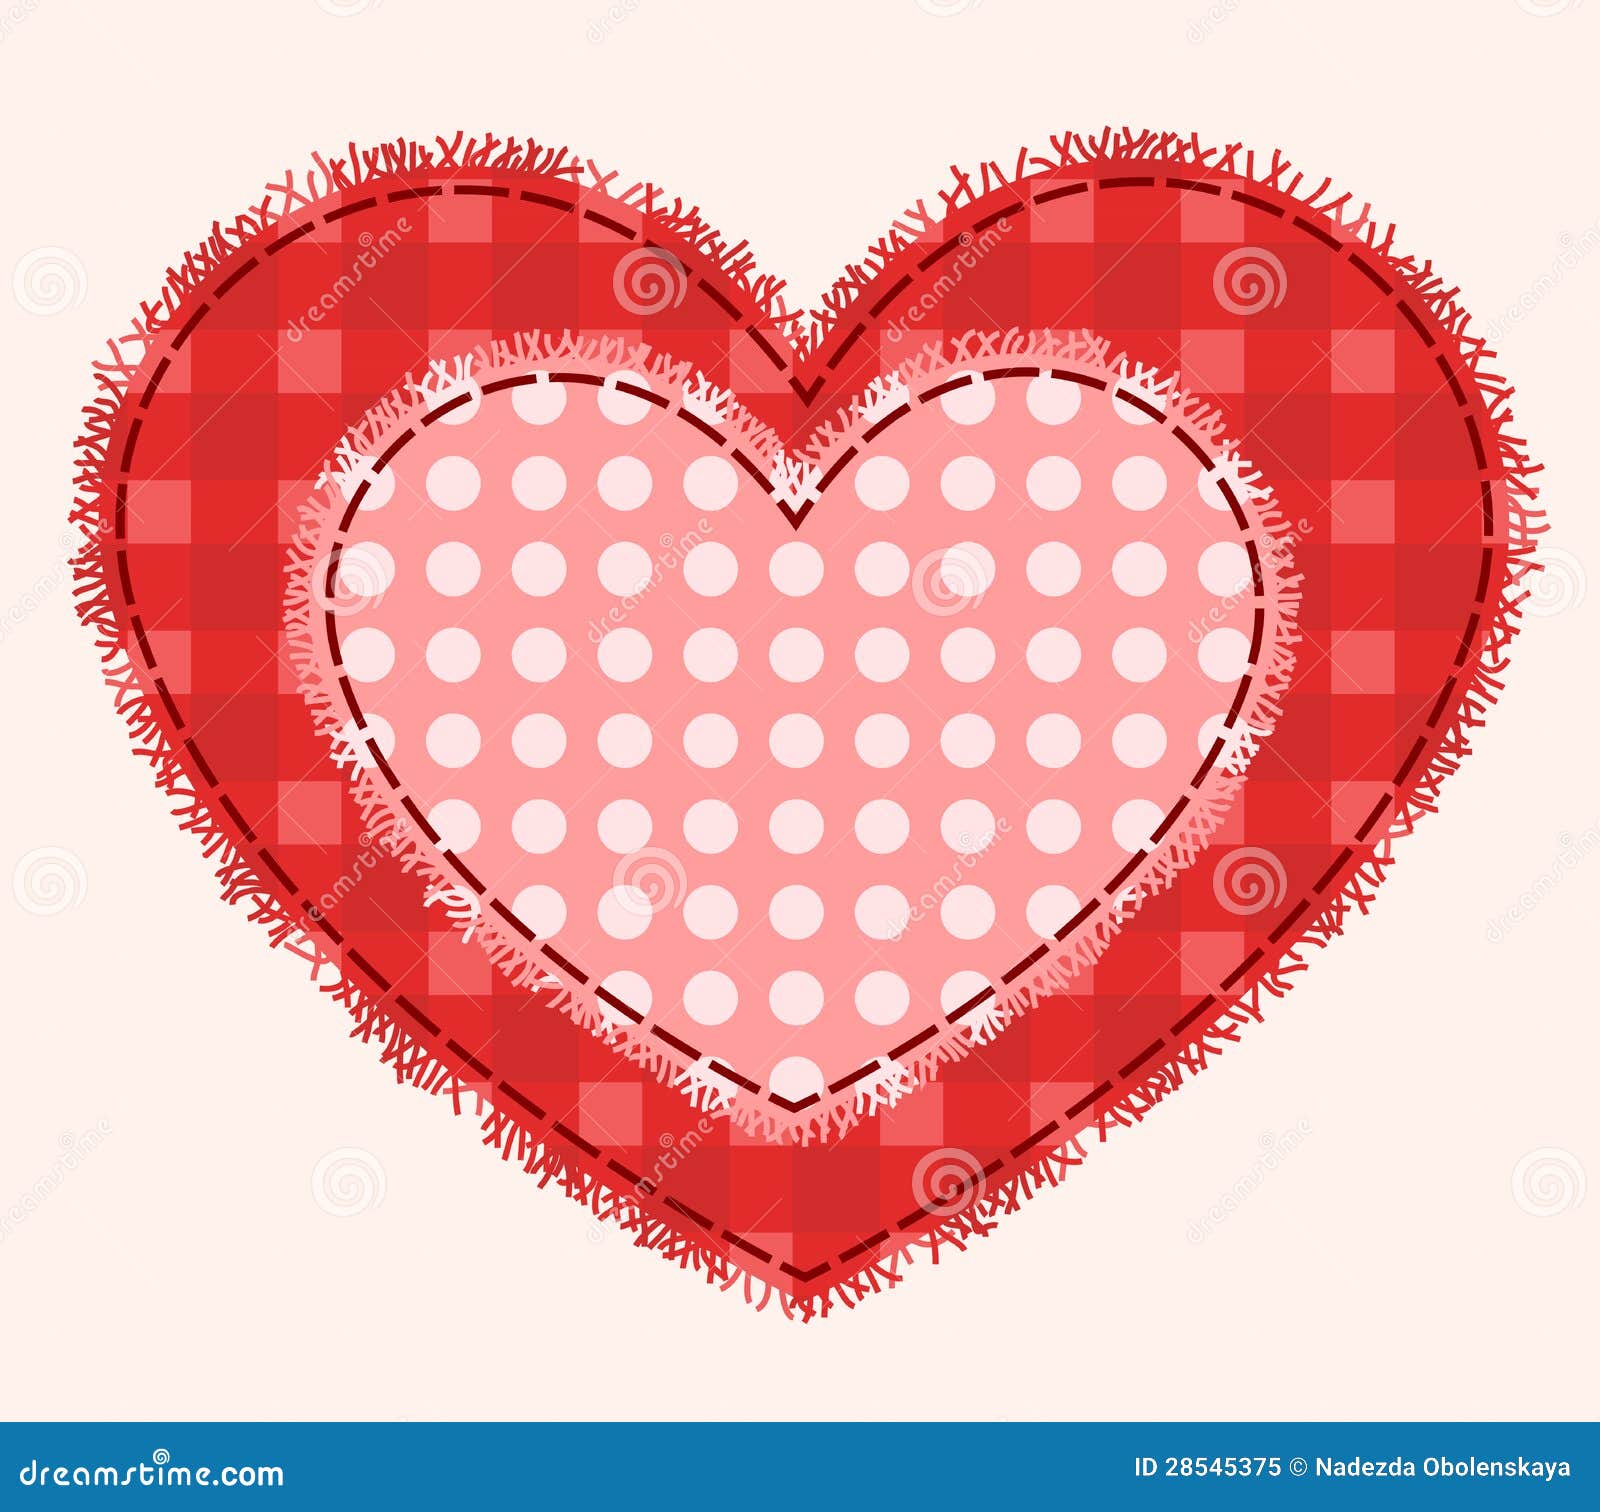 Two patchwork hearts stock vector. Illustration of romance ...